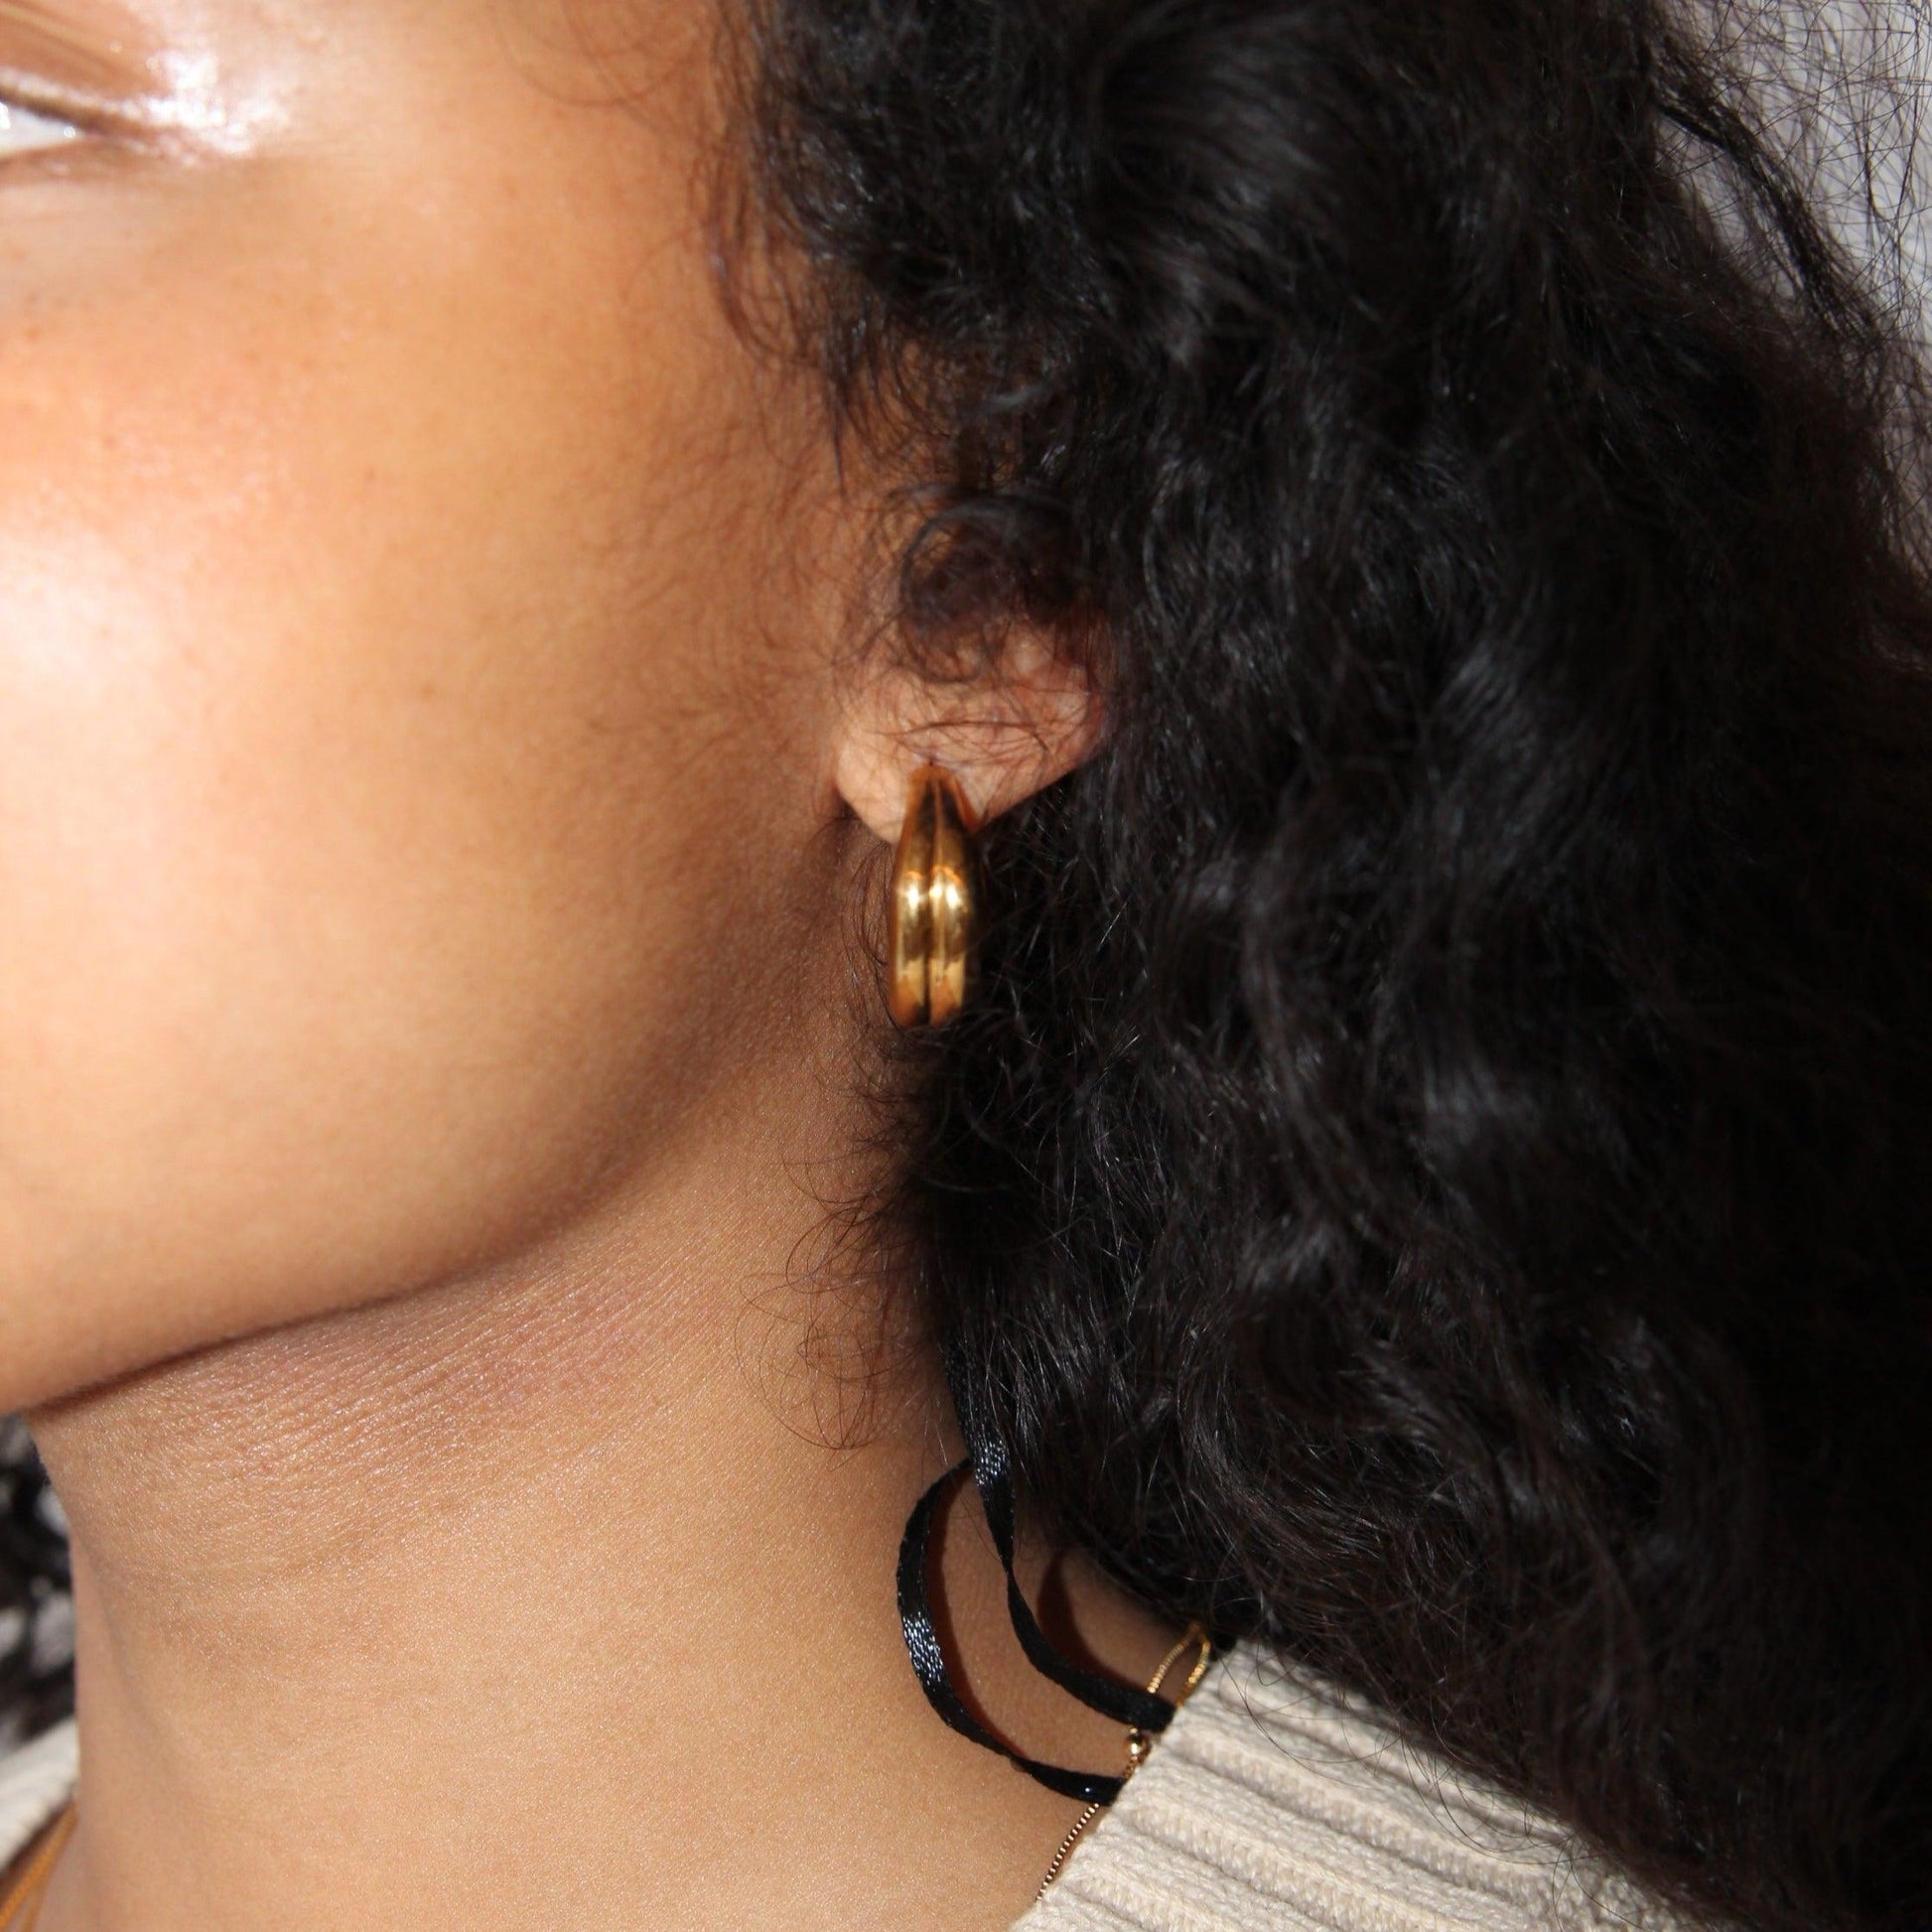 Bold large earrings with a double earring design